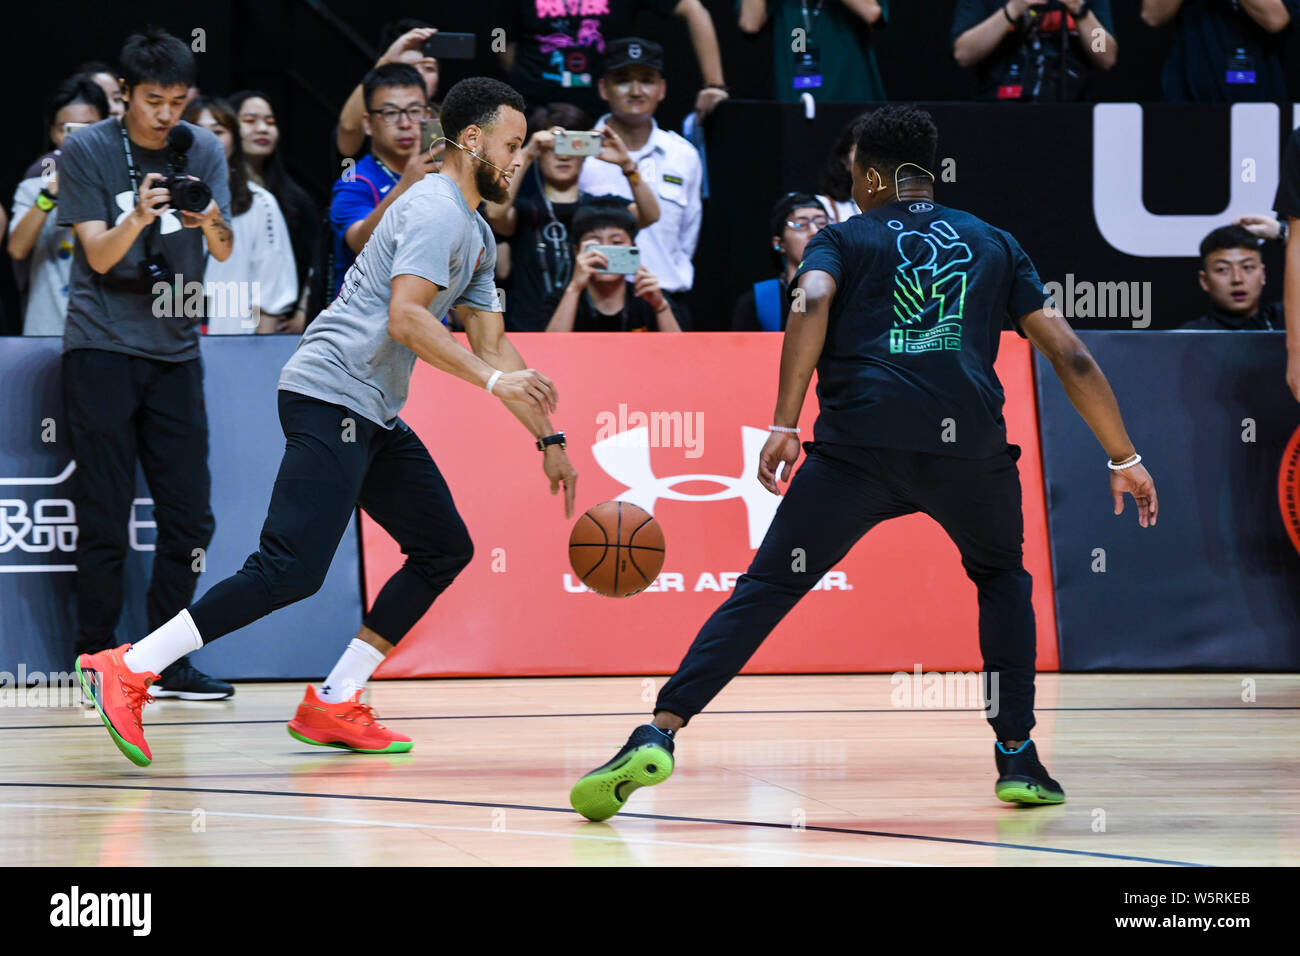 Confirmación Hollywood pedir NBA stars Stephen Curry, left, of Golden State Warriors, and Dennis Smith Jr.  of New York Knicks, attend the 2019 Under Armour Basketball Asia Tour in  Stock Photo - Alamy